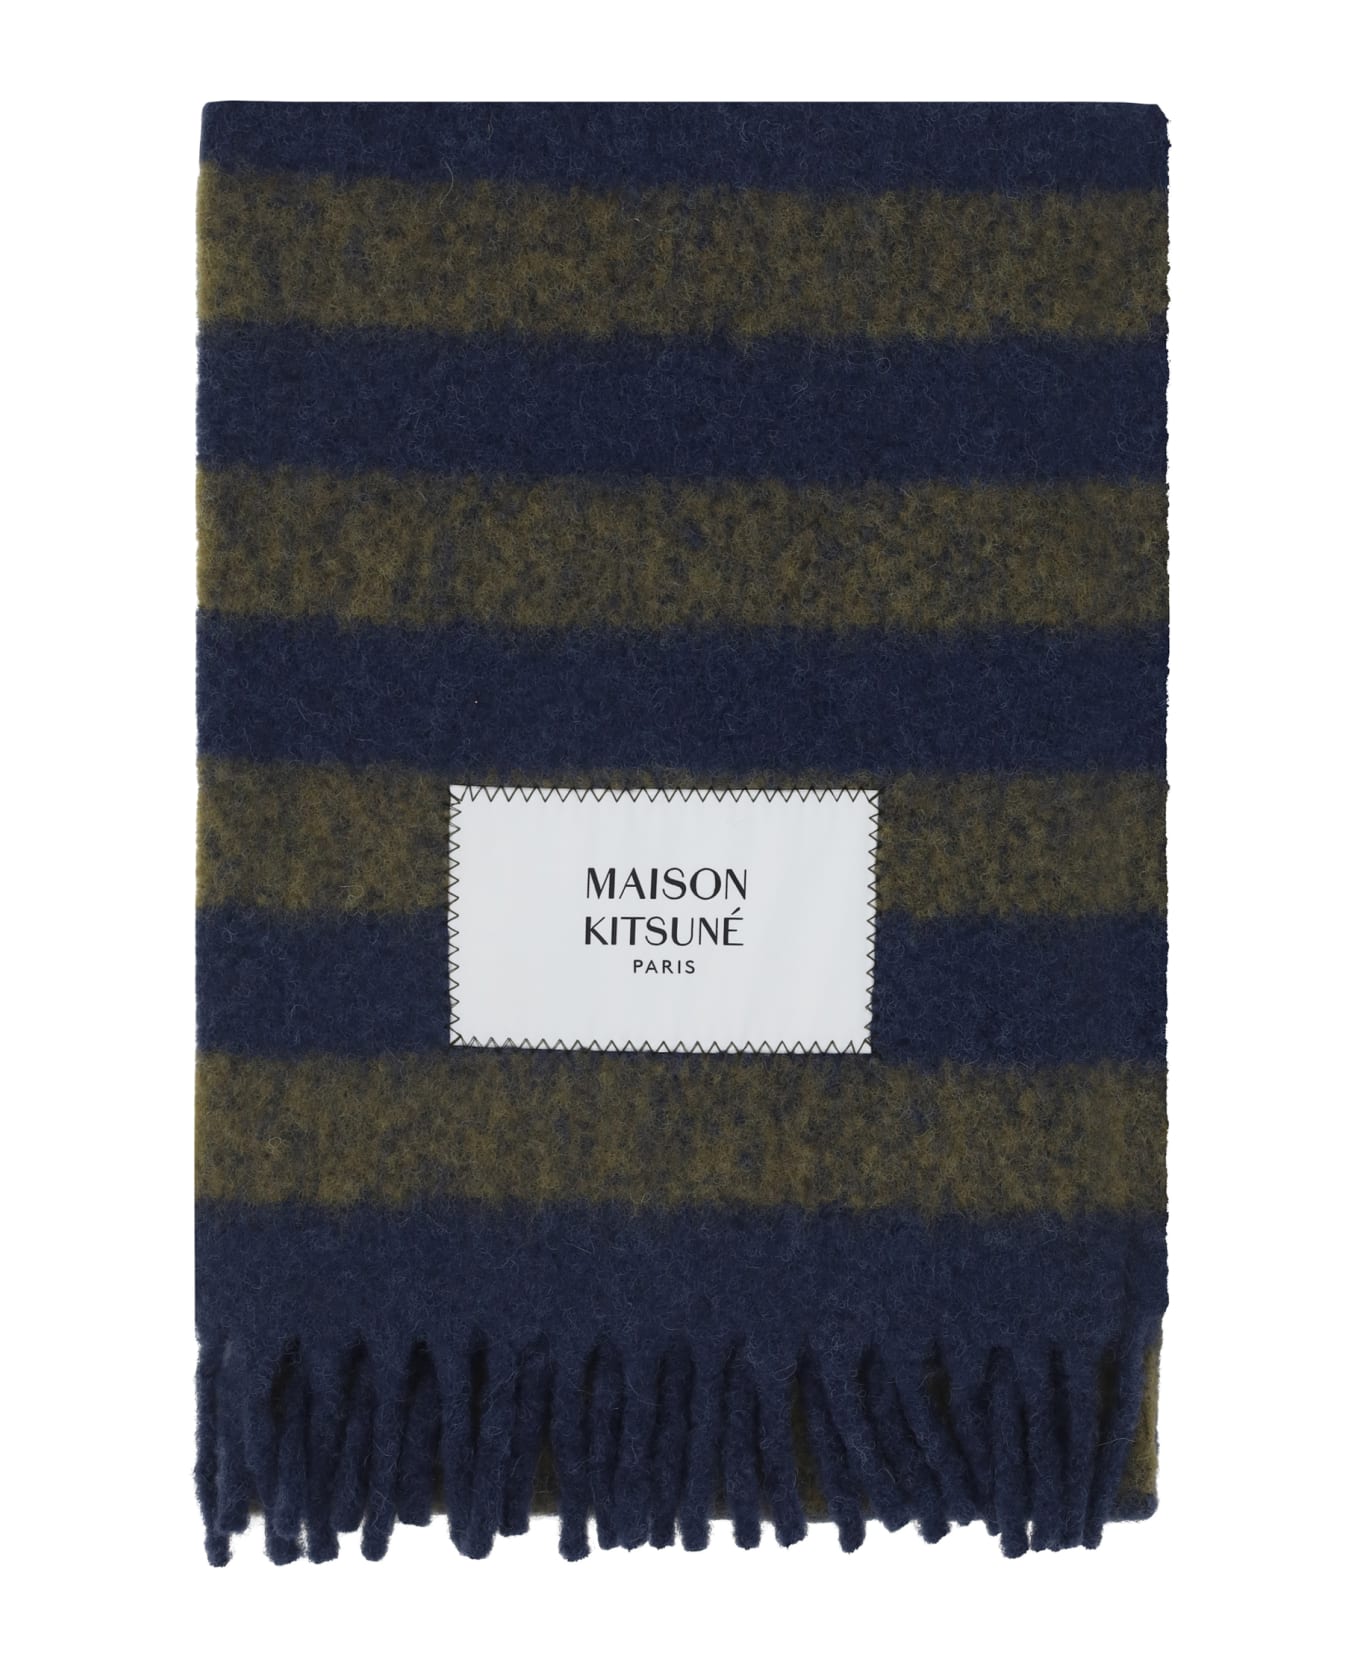 Maison Kitsuné Rugby Scarf - Gifts for Him